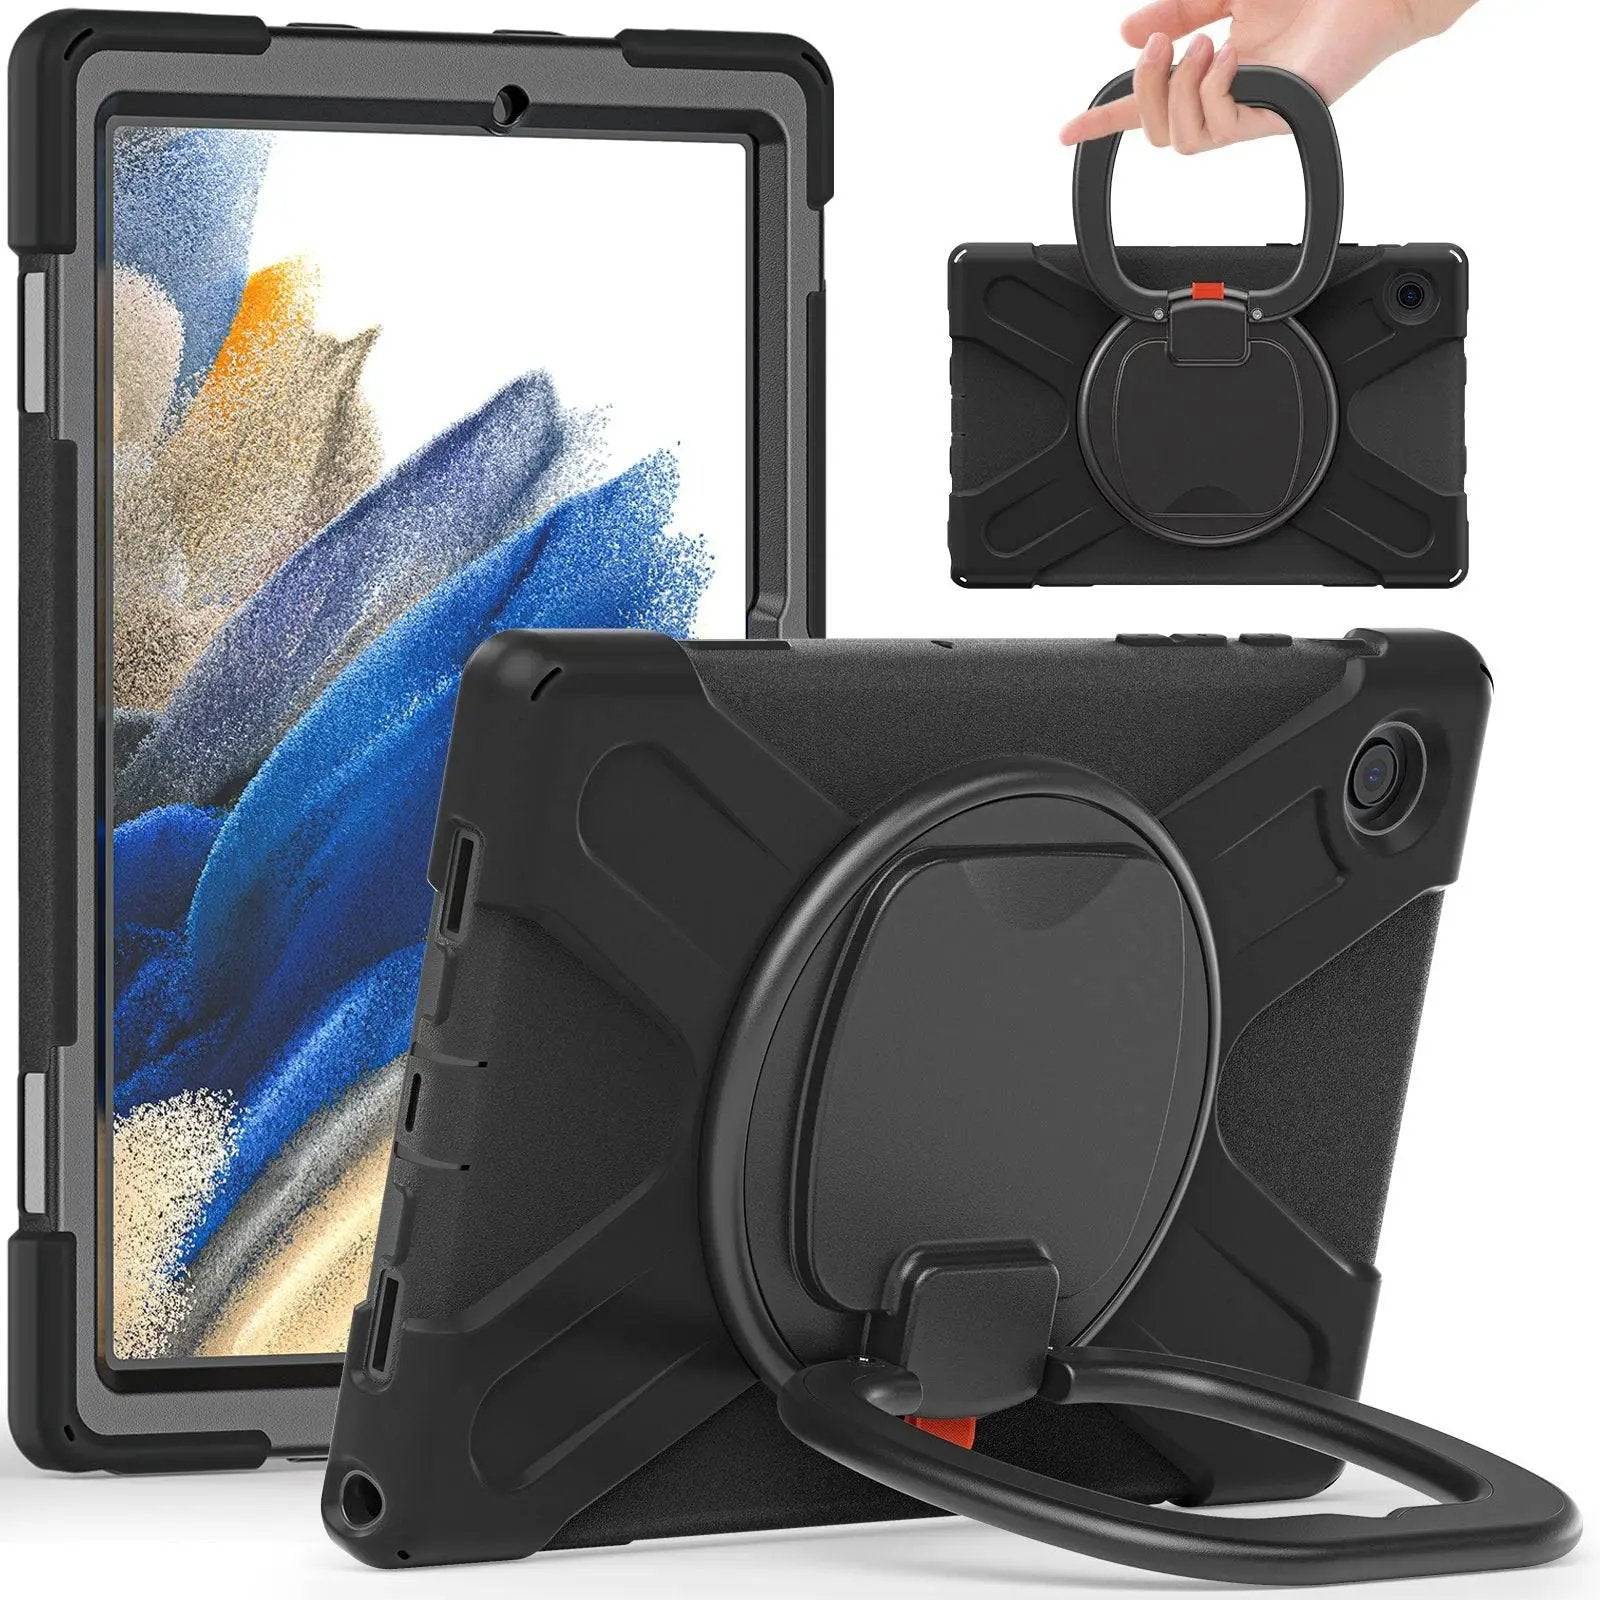 Pirate Kids Samsung A8 X200 Protective Tablet Case - Hugmie